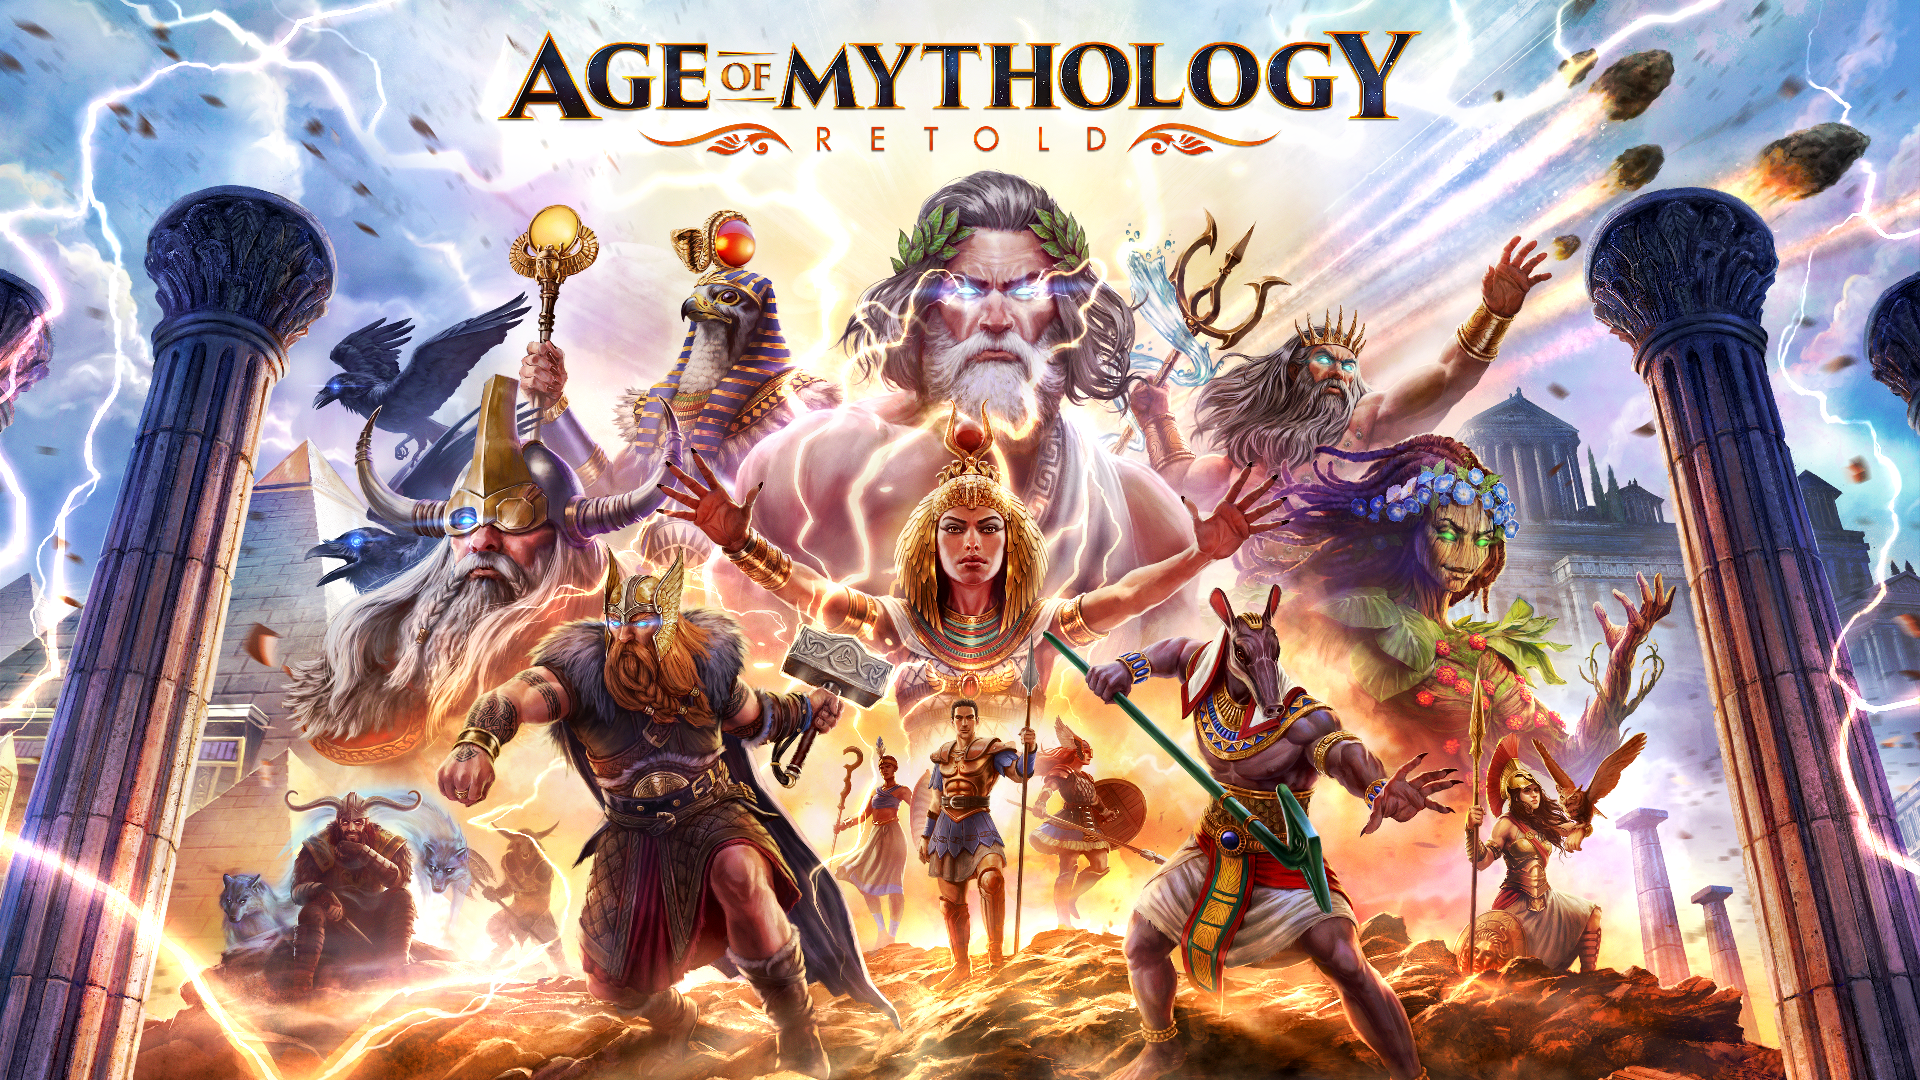 General 1920x1080 Age of Mythology Age of Mythology: Retold strategy games video games video game art